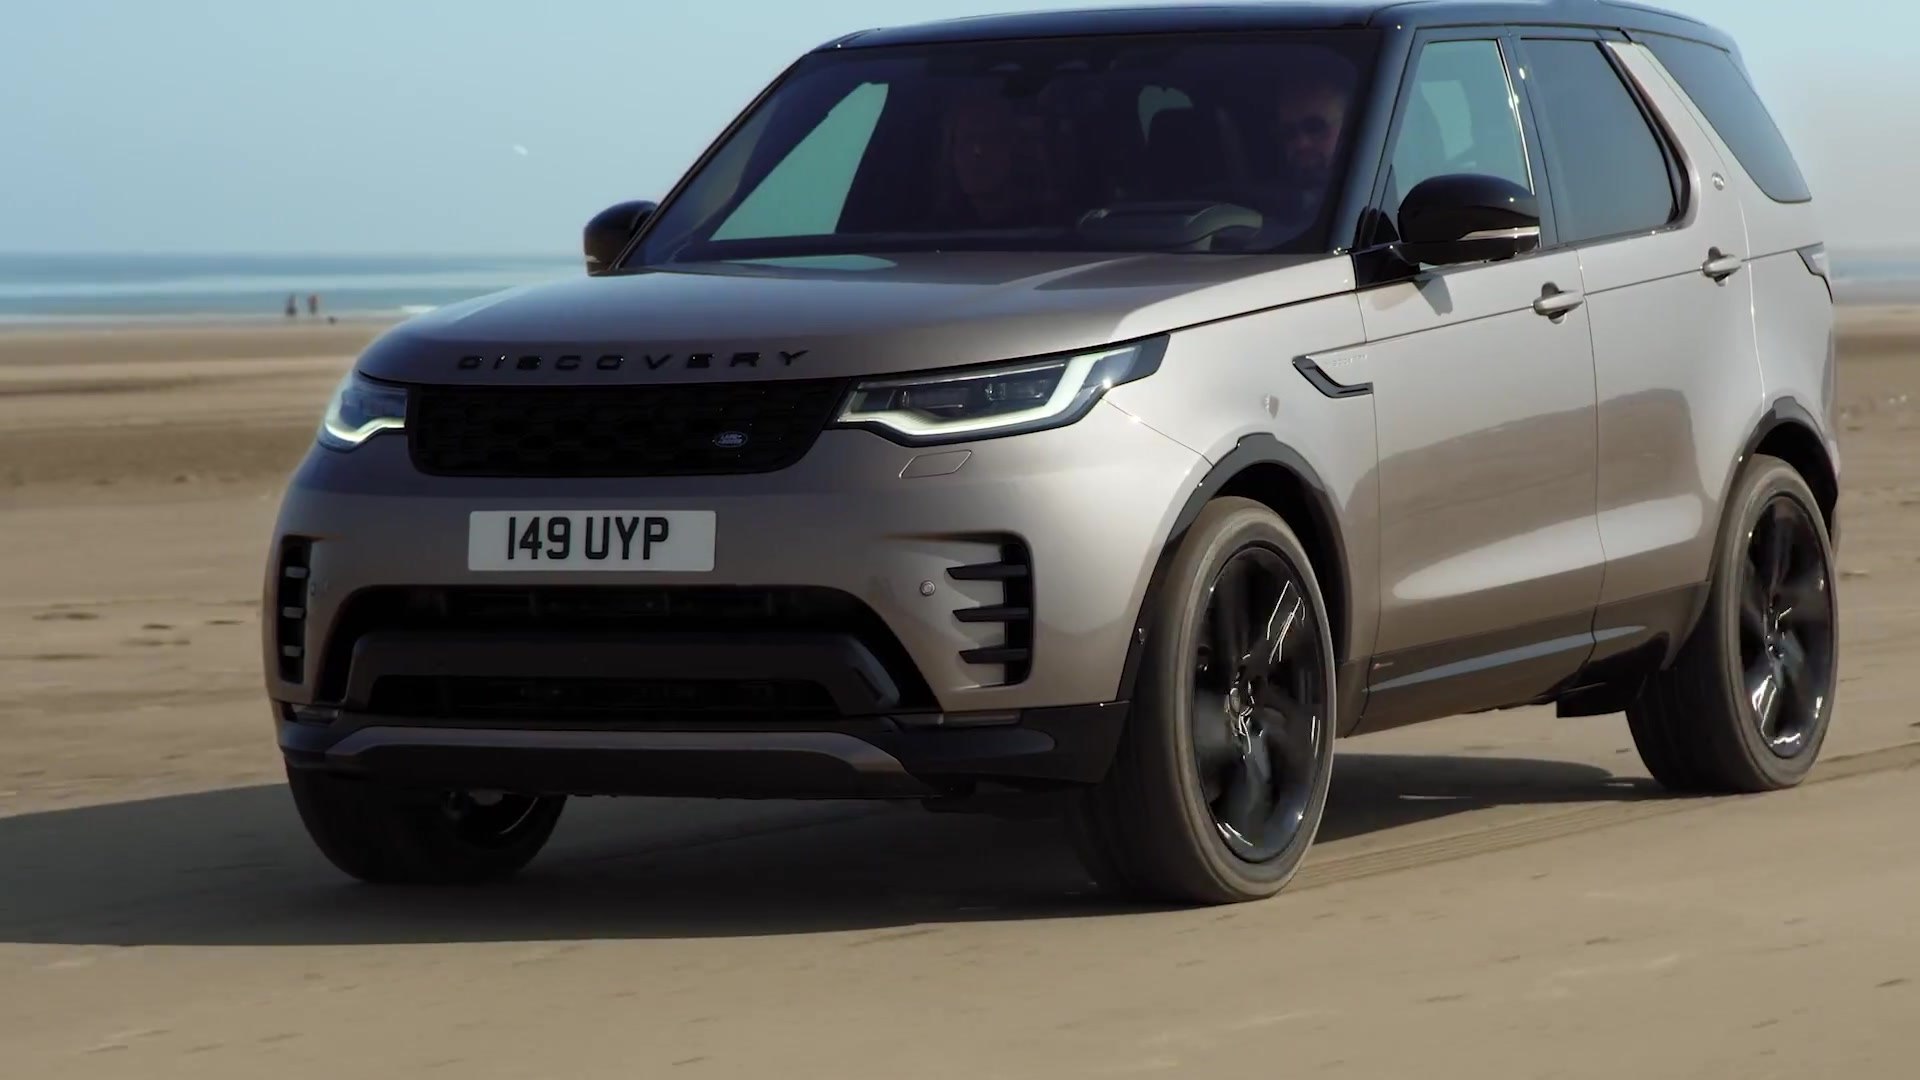 New Land Rover Discovery R-Dynamic HSE Driving Video - video Dailymotion